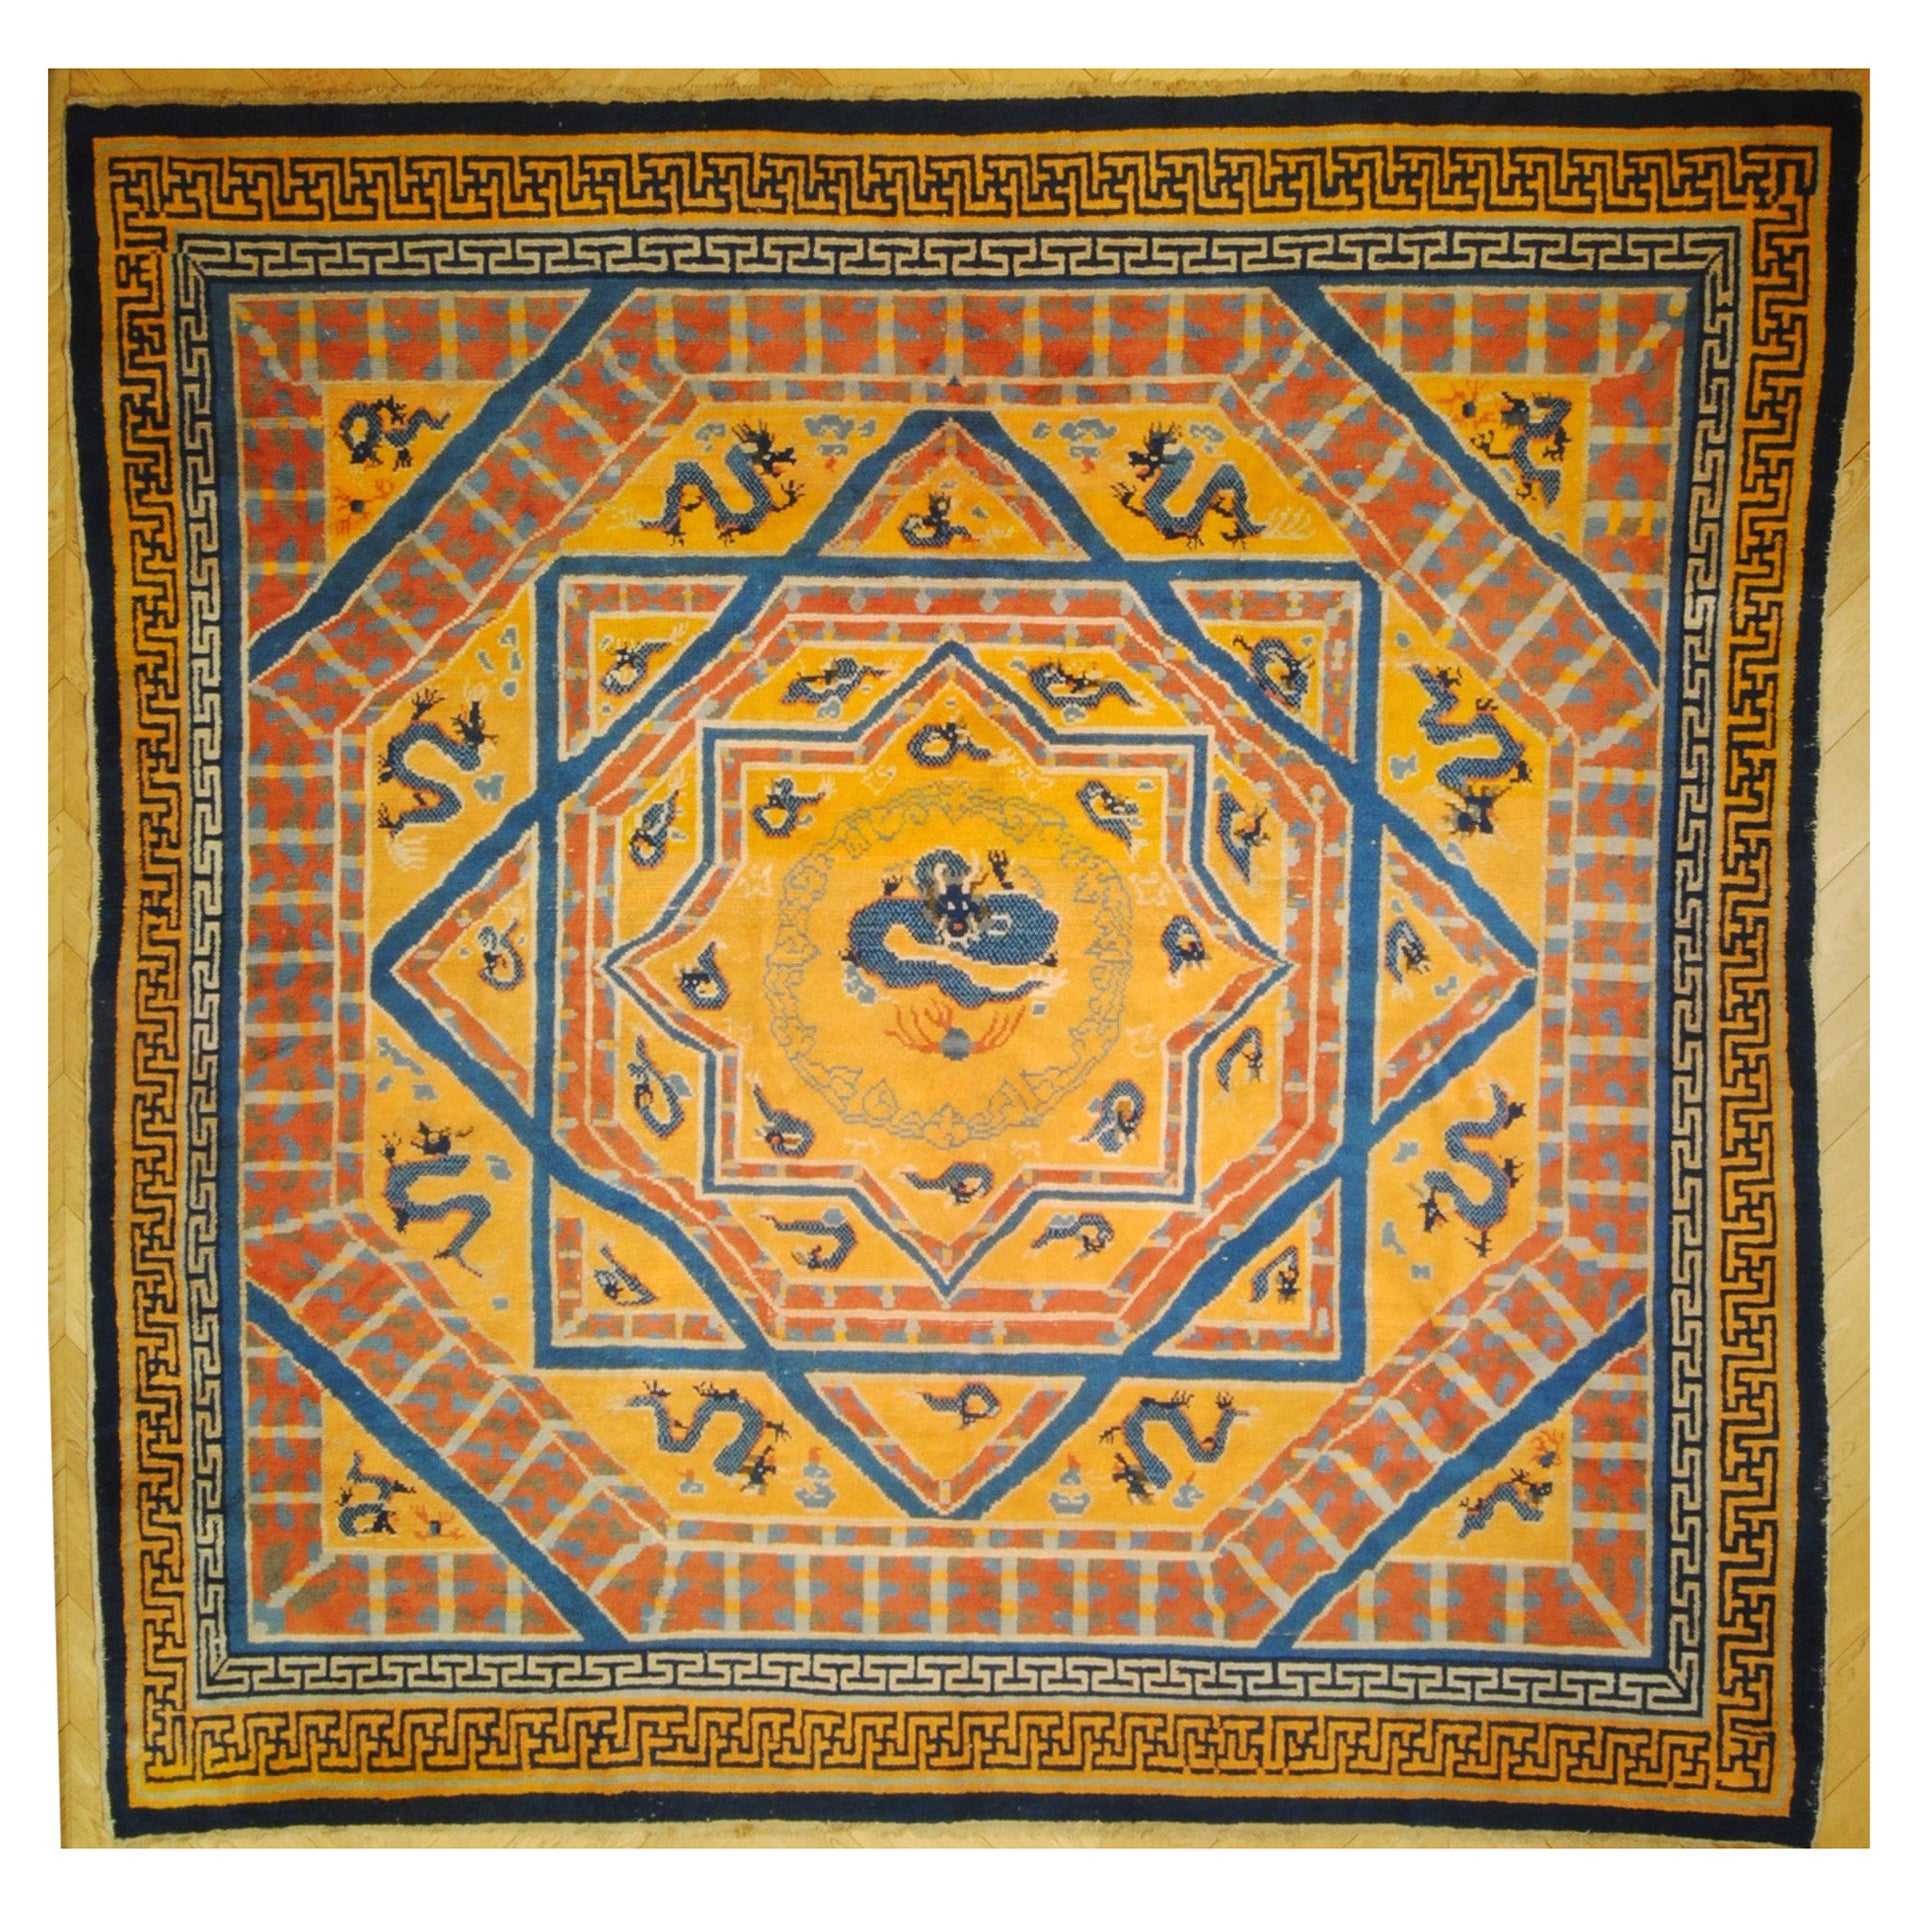 China orange background 8 dragons repeated in multiple levels and 8-pointed star in center For Sale